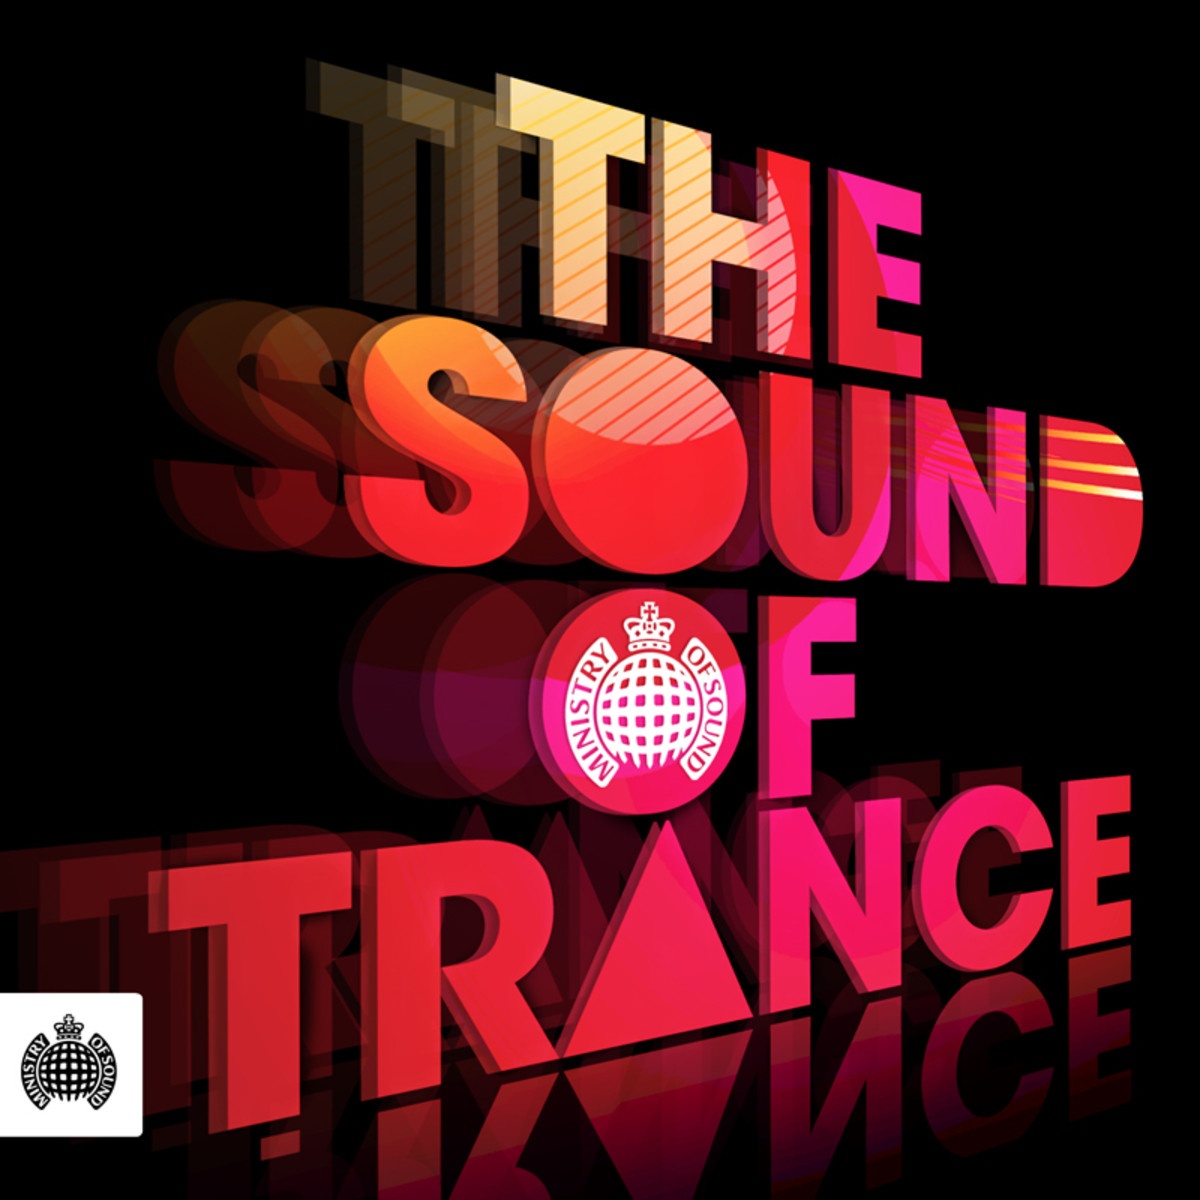 Ministry Of Sound: The Sound Of Trance